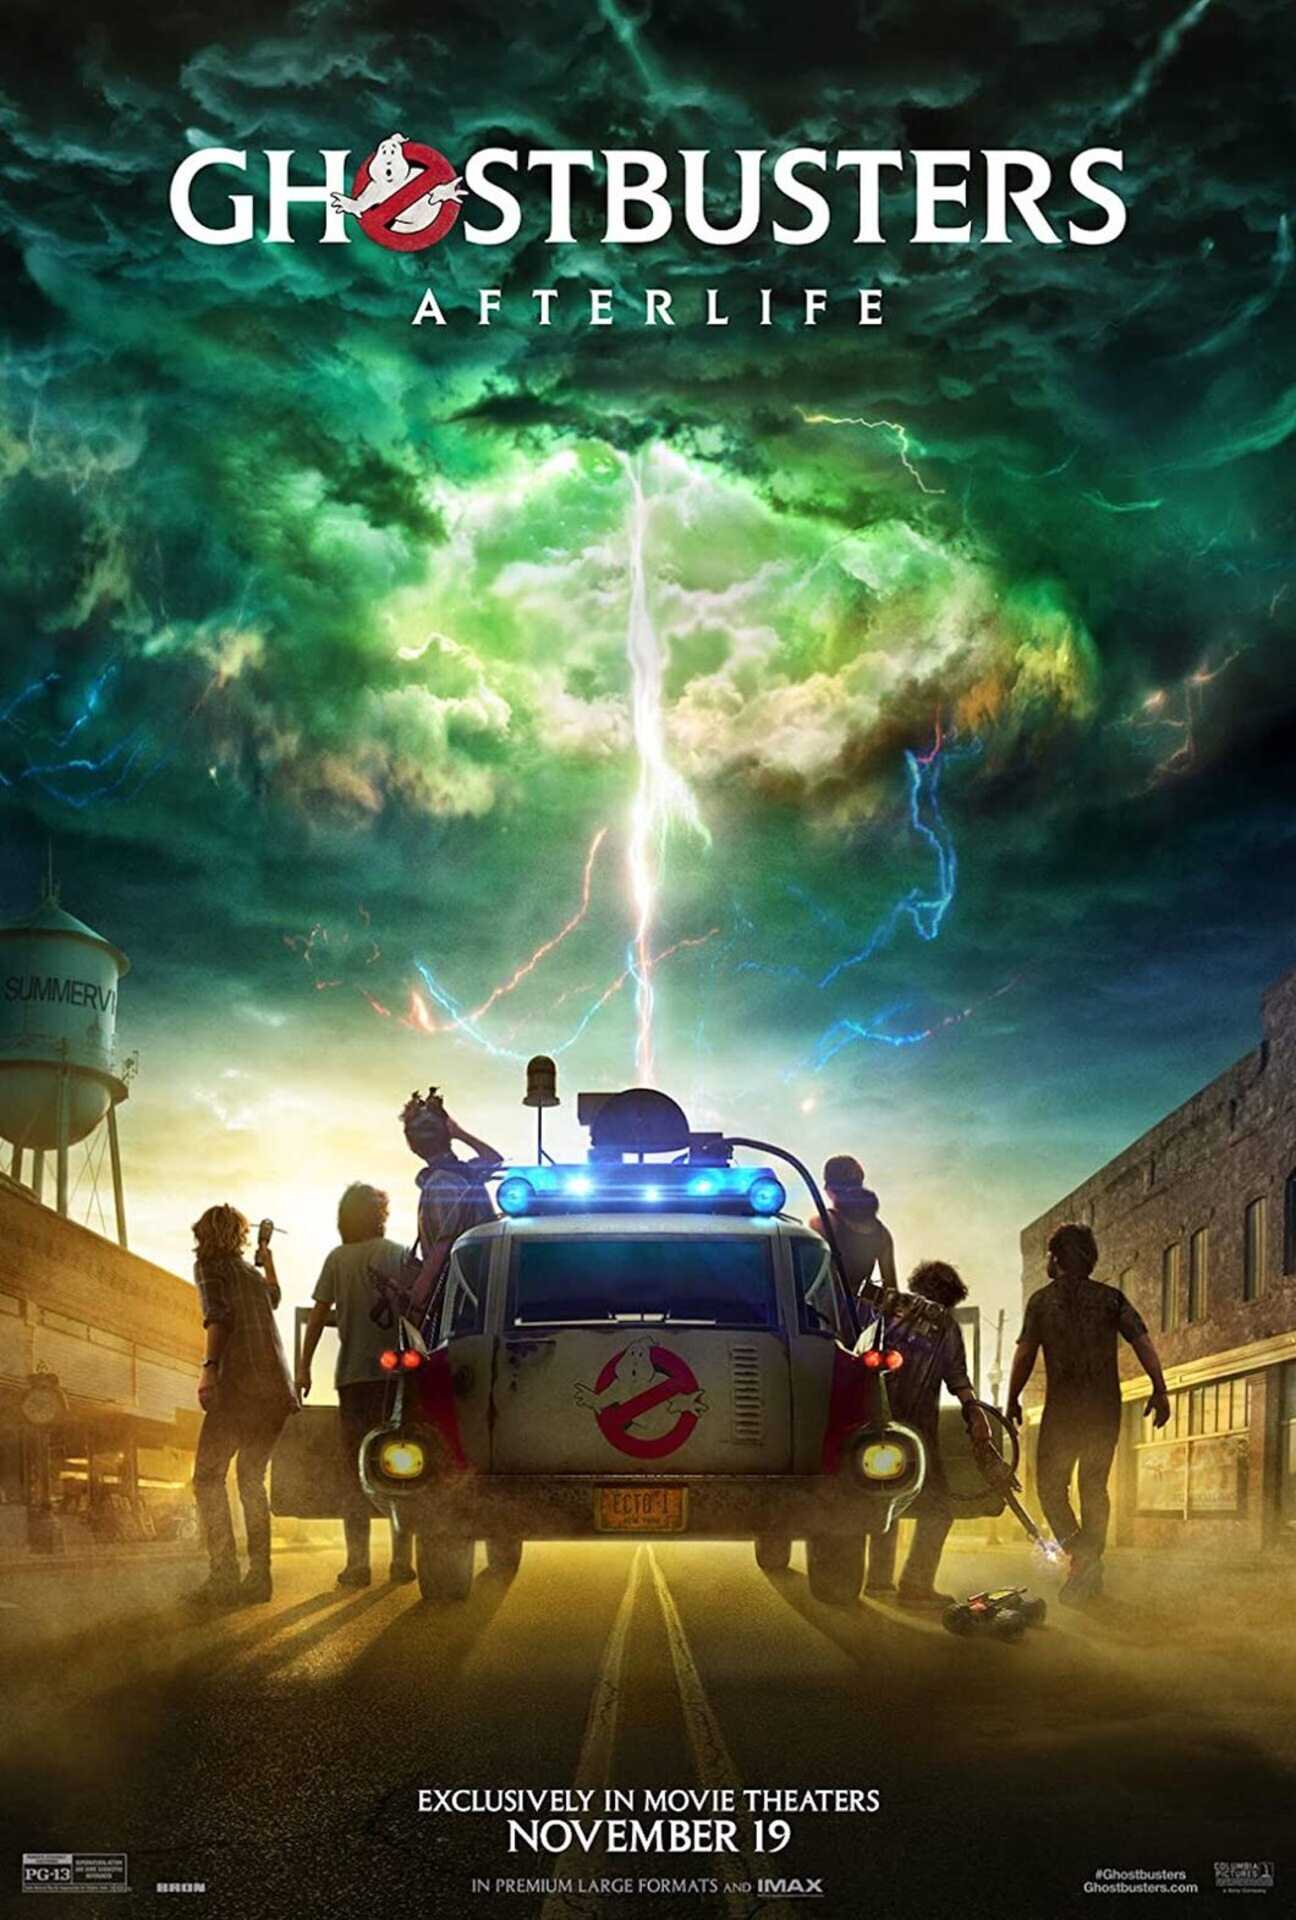 Theatrical poster for Ghostbusters: Afterlife.